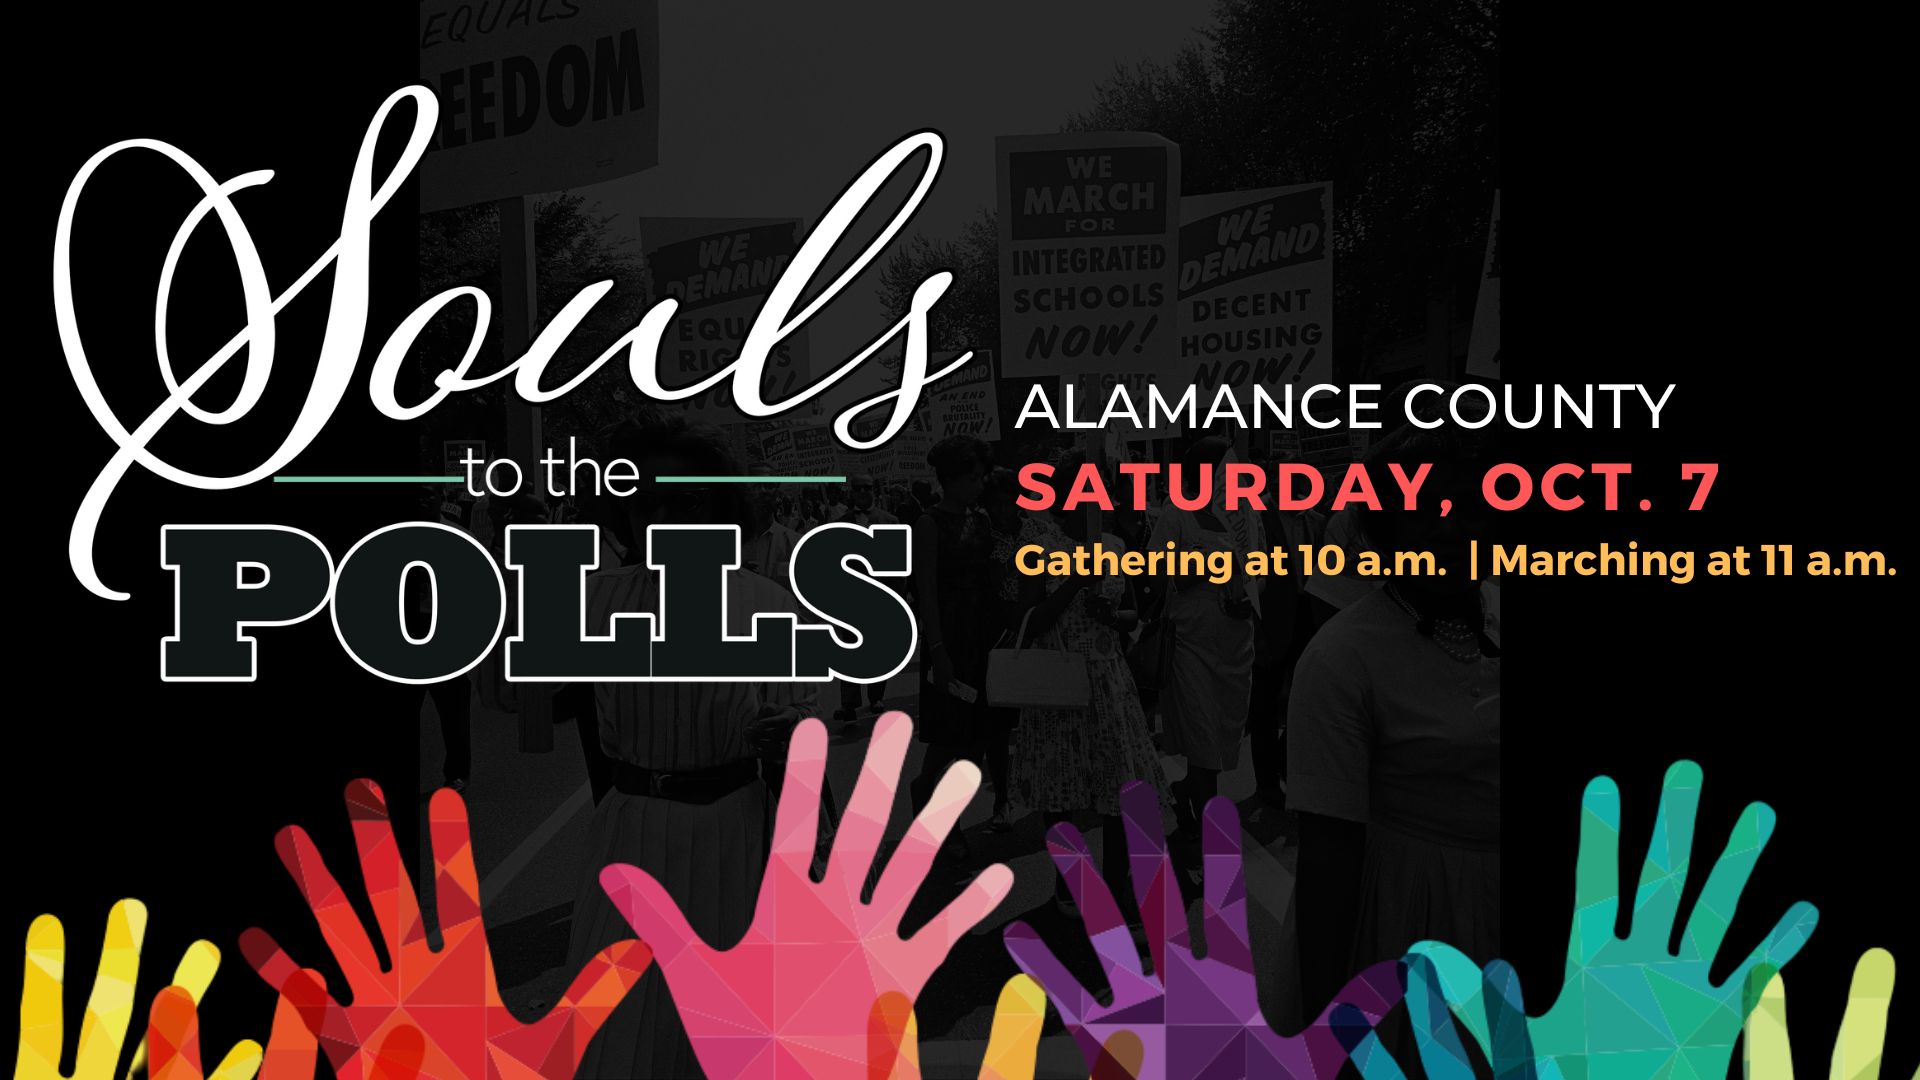 Souls to the Polls event graphic for Oct. 7